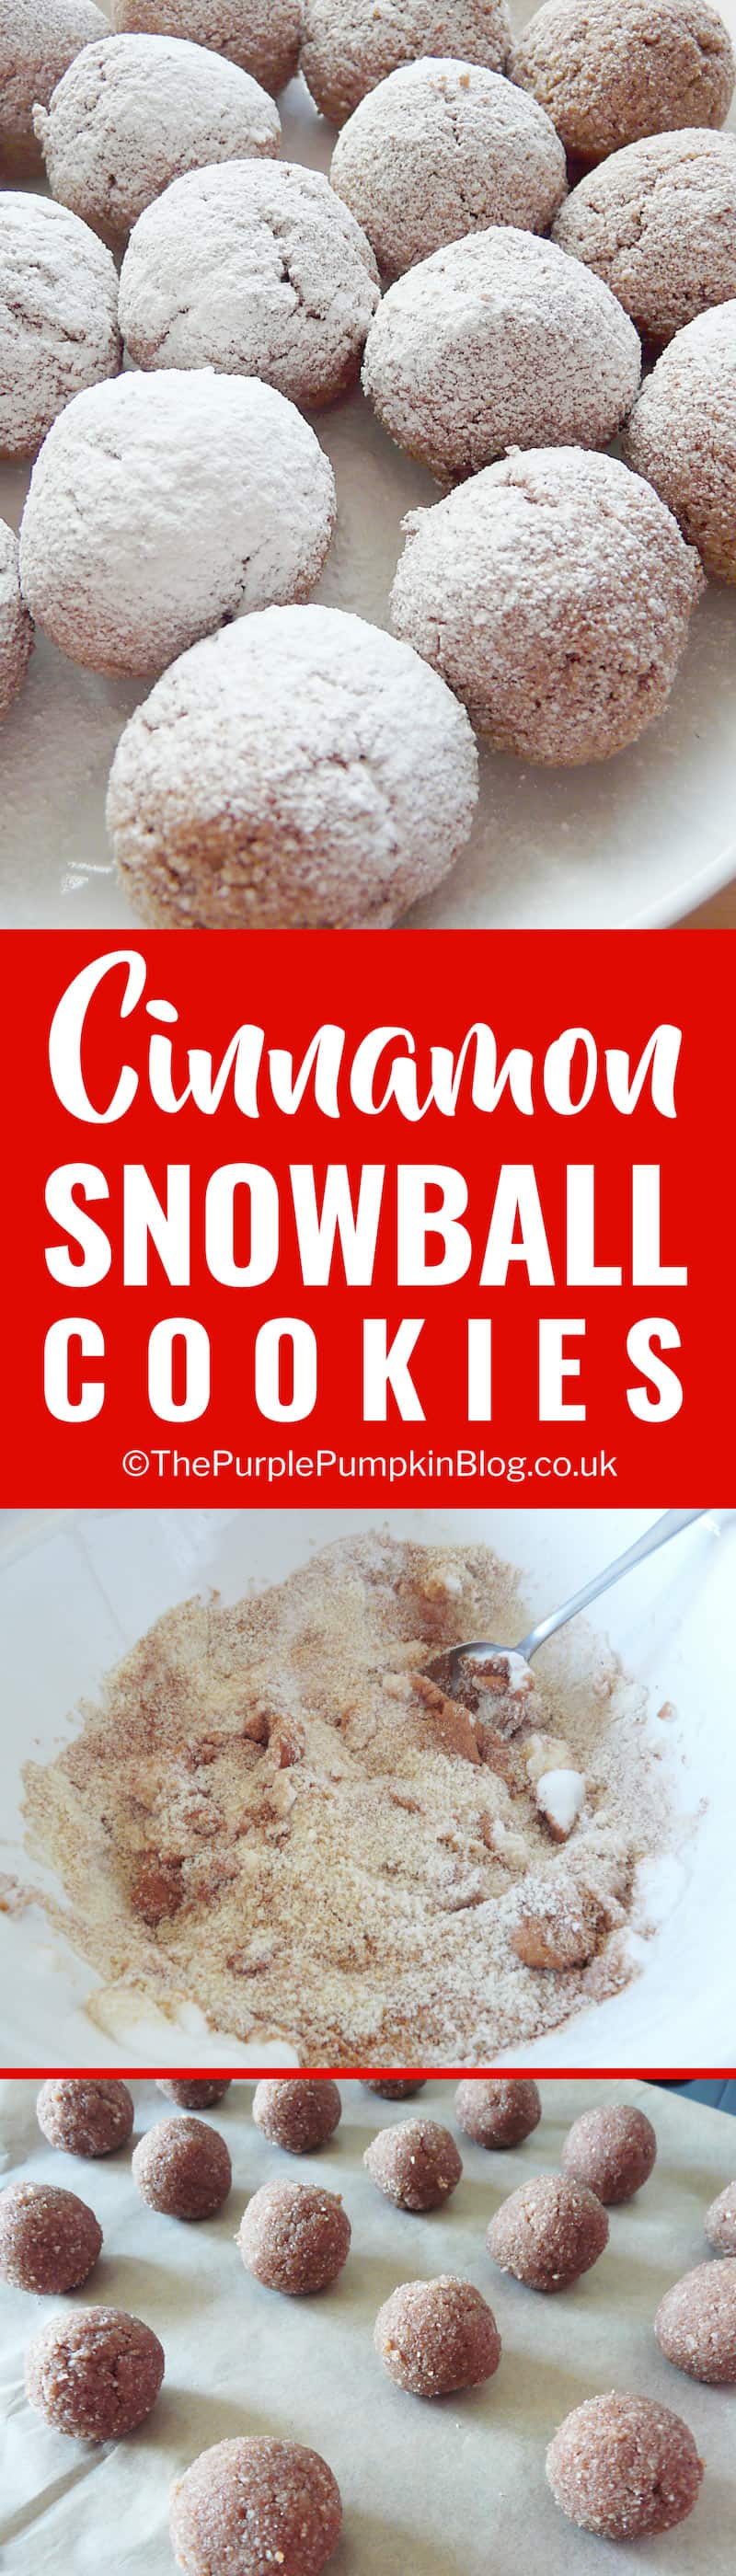 These Cinnamon Snowball Cookies are so quick and easy to make, taste delicious and are also gluten-free and dairy-free. A yummy festive sweet treat!